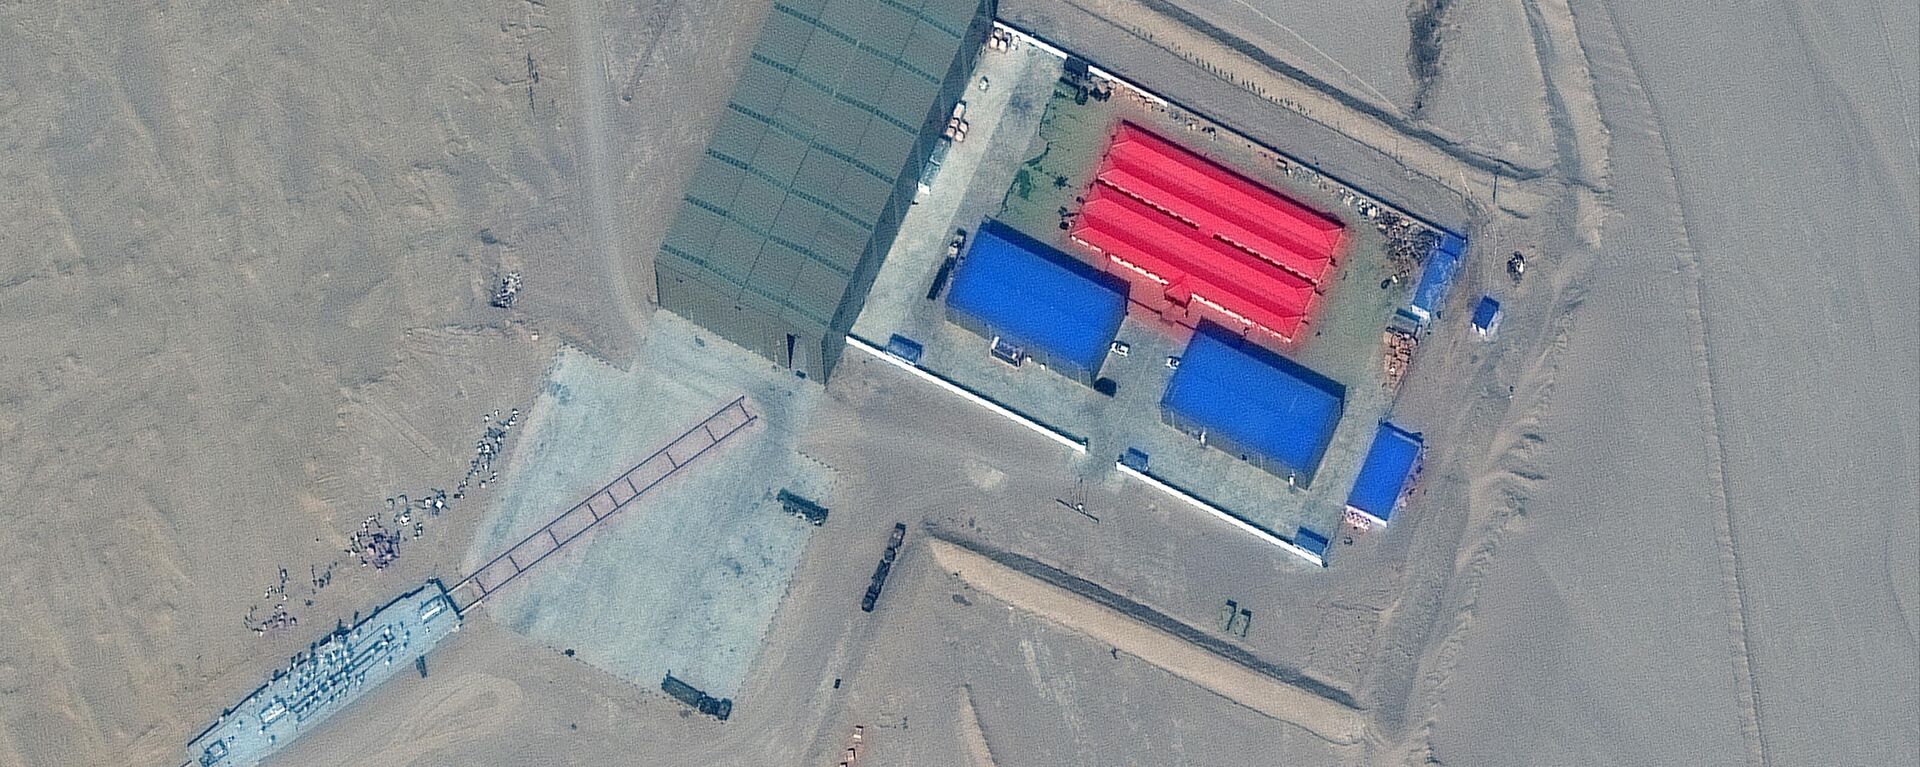 This handout satellite image released by Maxar Technologies on November 8, 2021 shows a rail terminus and a target storage building in Ruoqiang county in the Taklamakan Desert, China's western Xinjiang region on October 8, 2021 - Sputnik International, 1920, 08.11.2021